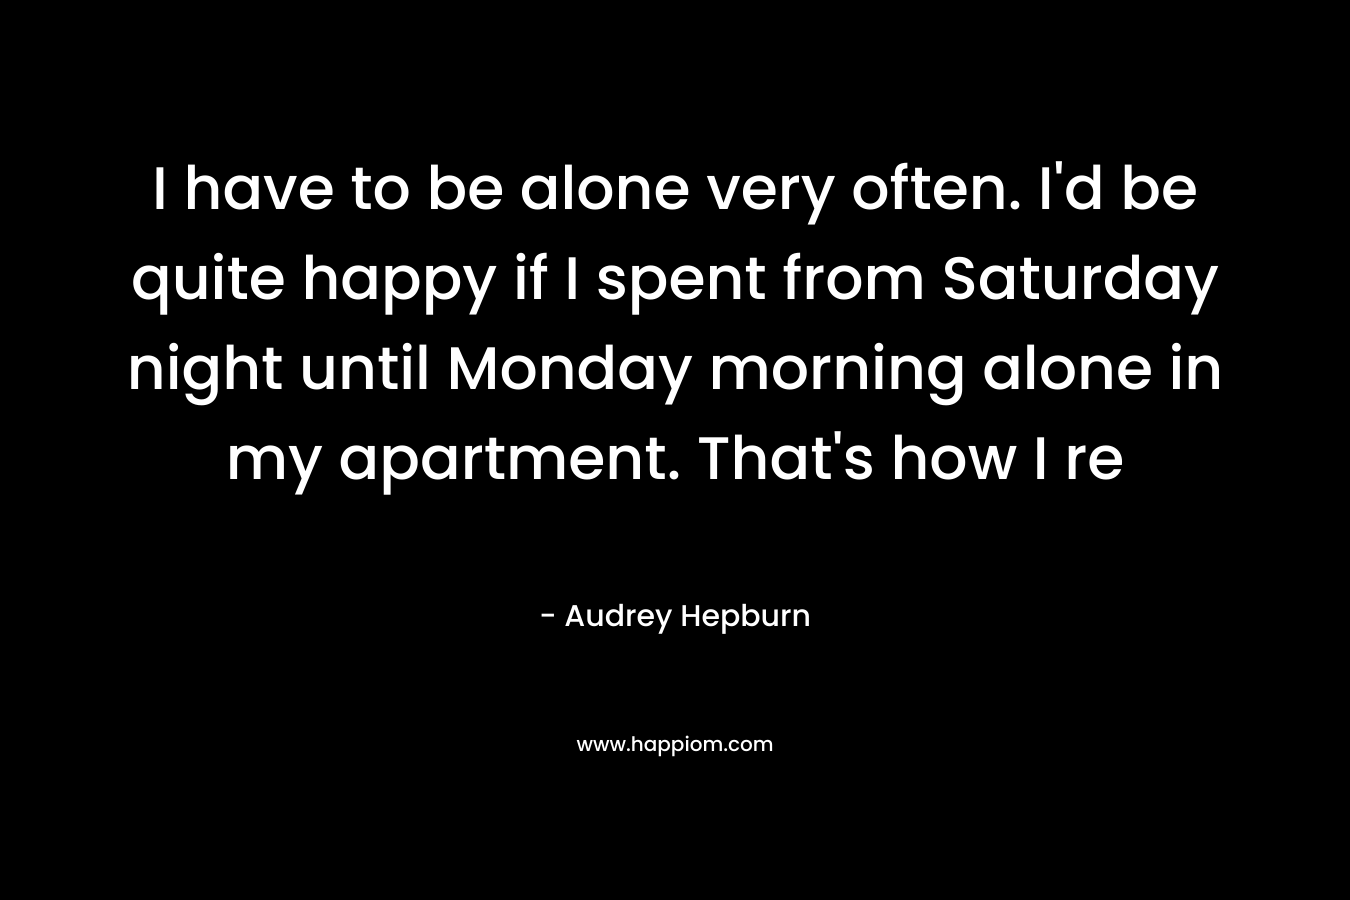 I have to be alone very often. I'd be quite happy if I spent from Saturday night until Monday morning alone in my apartment. That's how I re